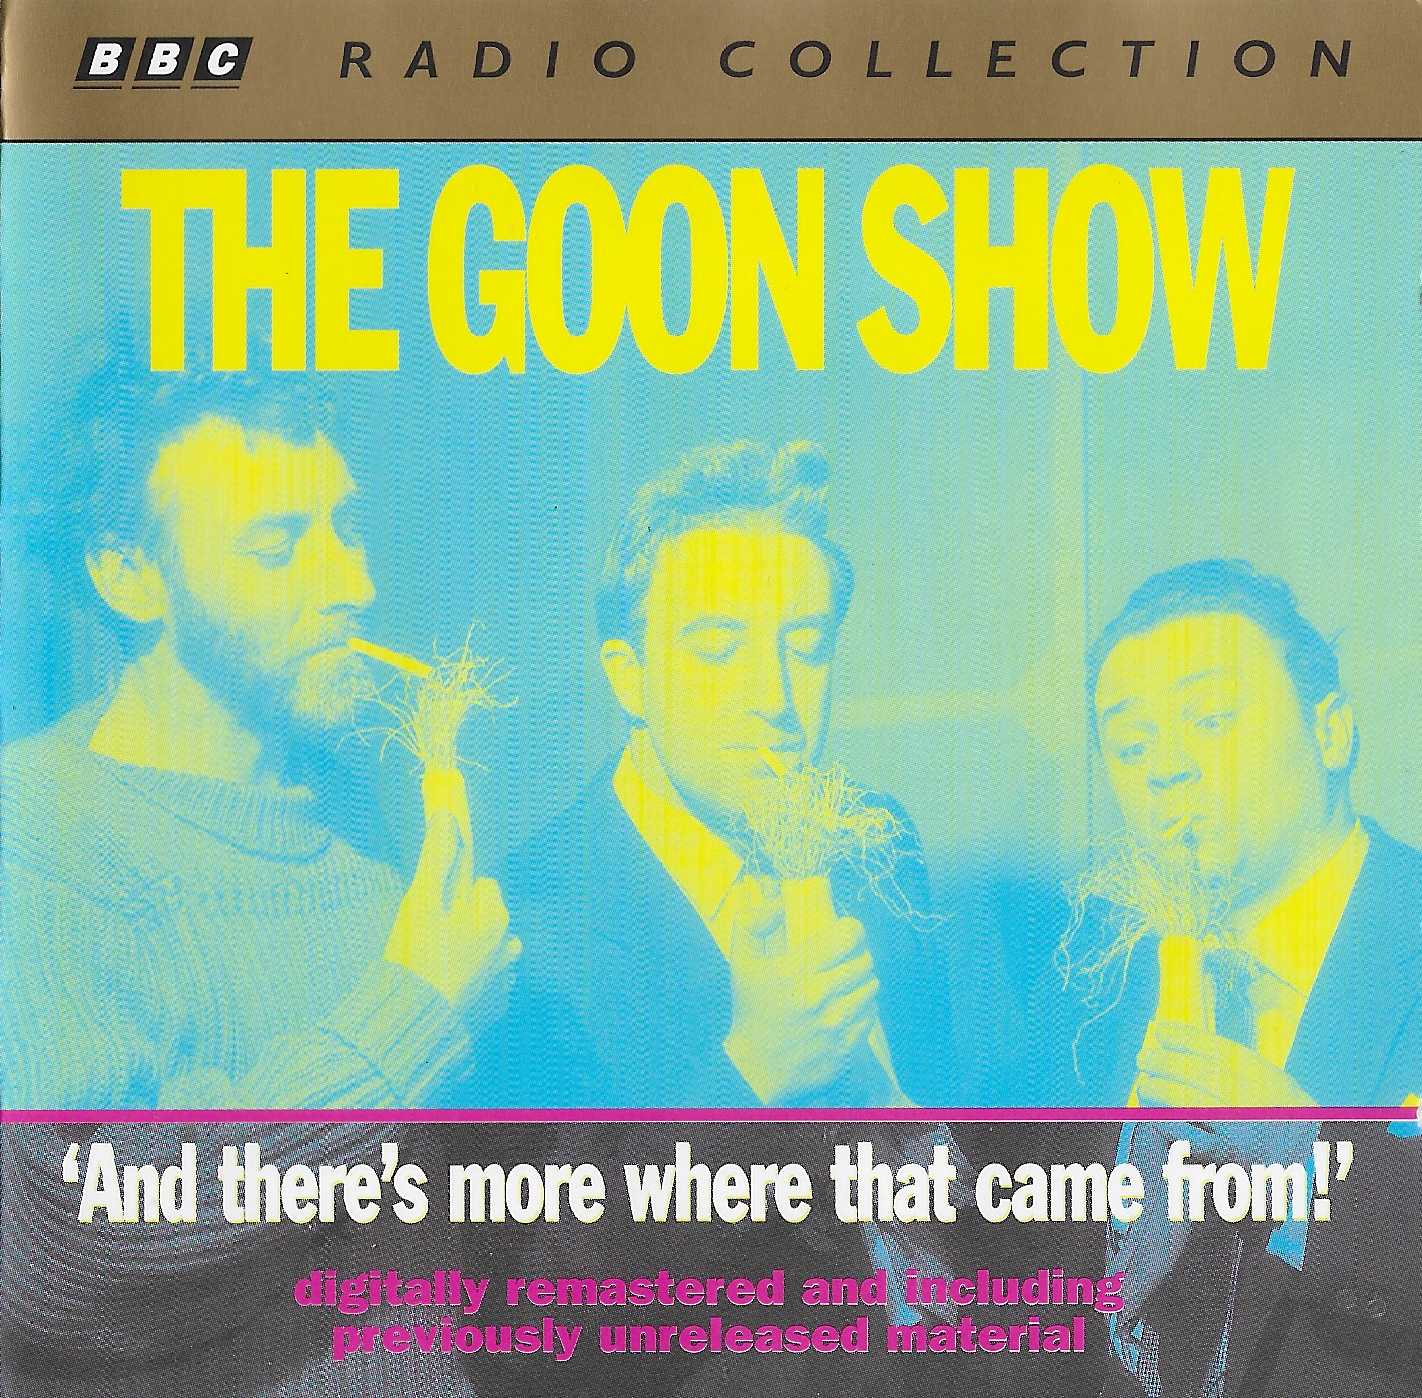 Picture of The Goon show 5 - And there's more where that came from! by artist Spike Milligan / Eric Sykes / Larry Stephens from the BBC cds - Records and Tapes library